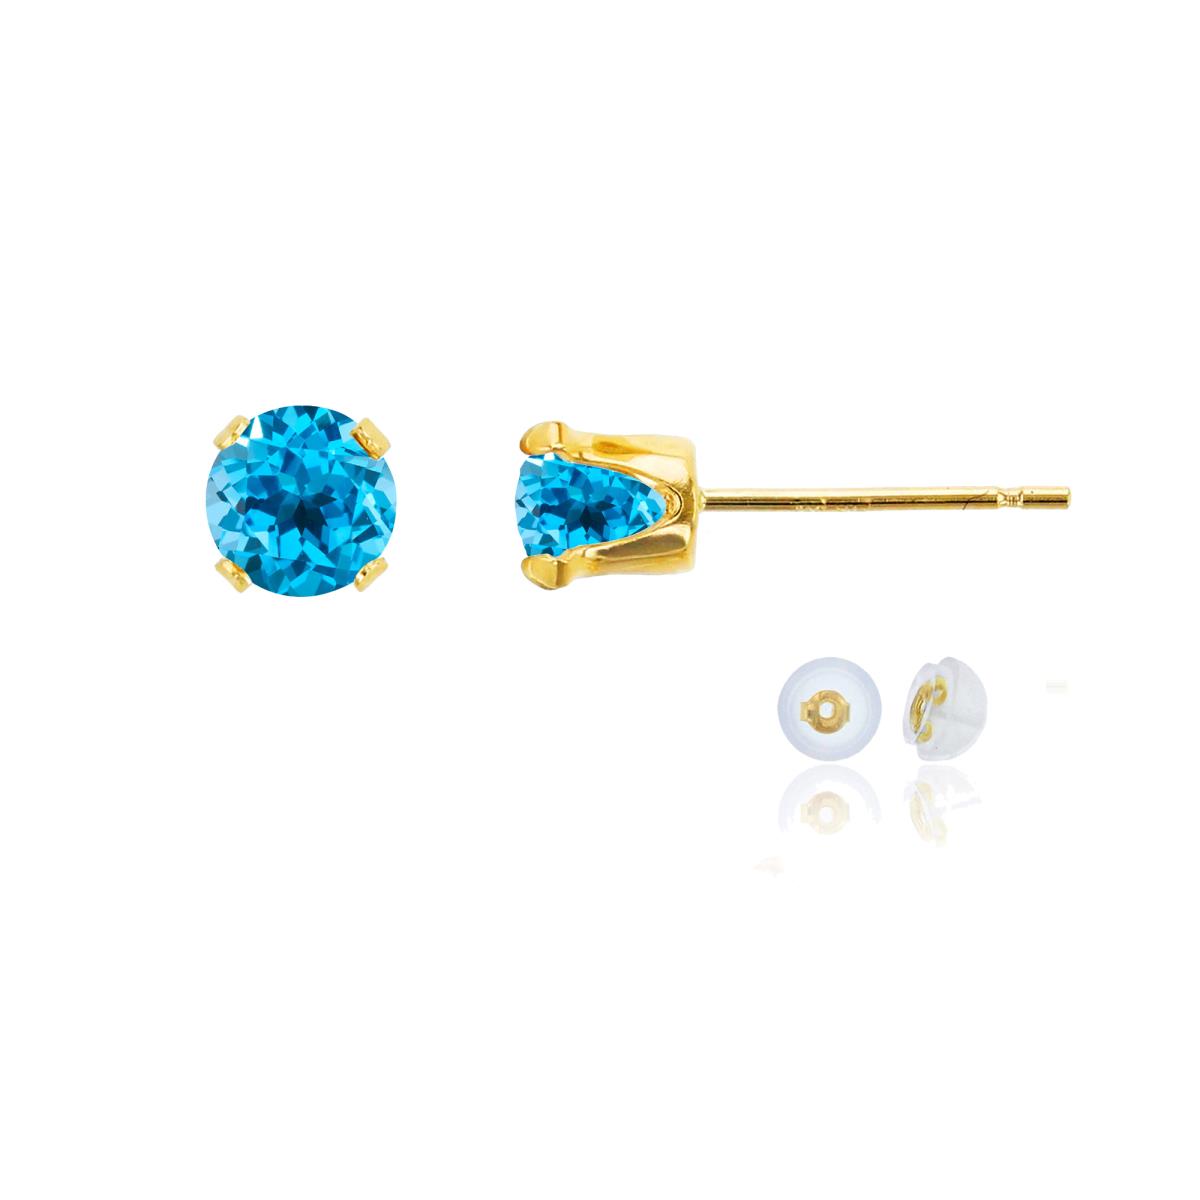 10K Yellow Gold 5mm Round Swiss Blue Topaz Stud Earring with Silicone Back